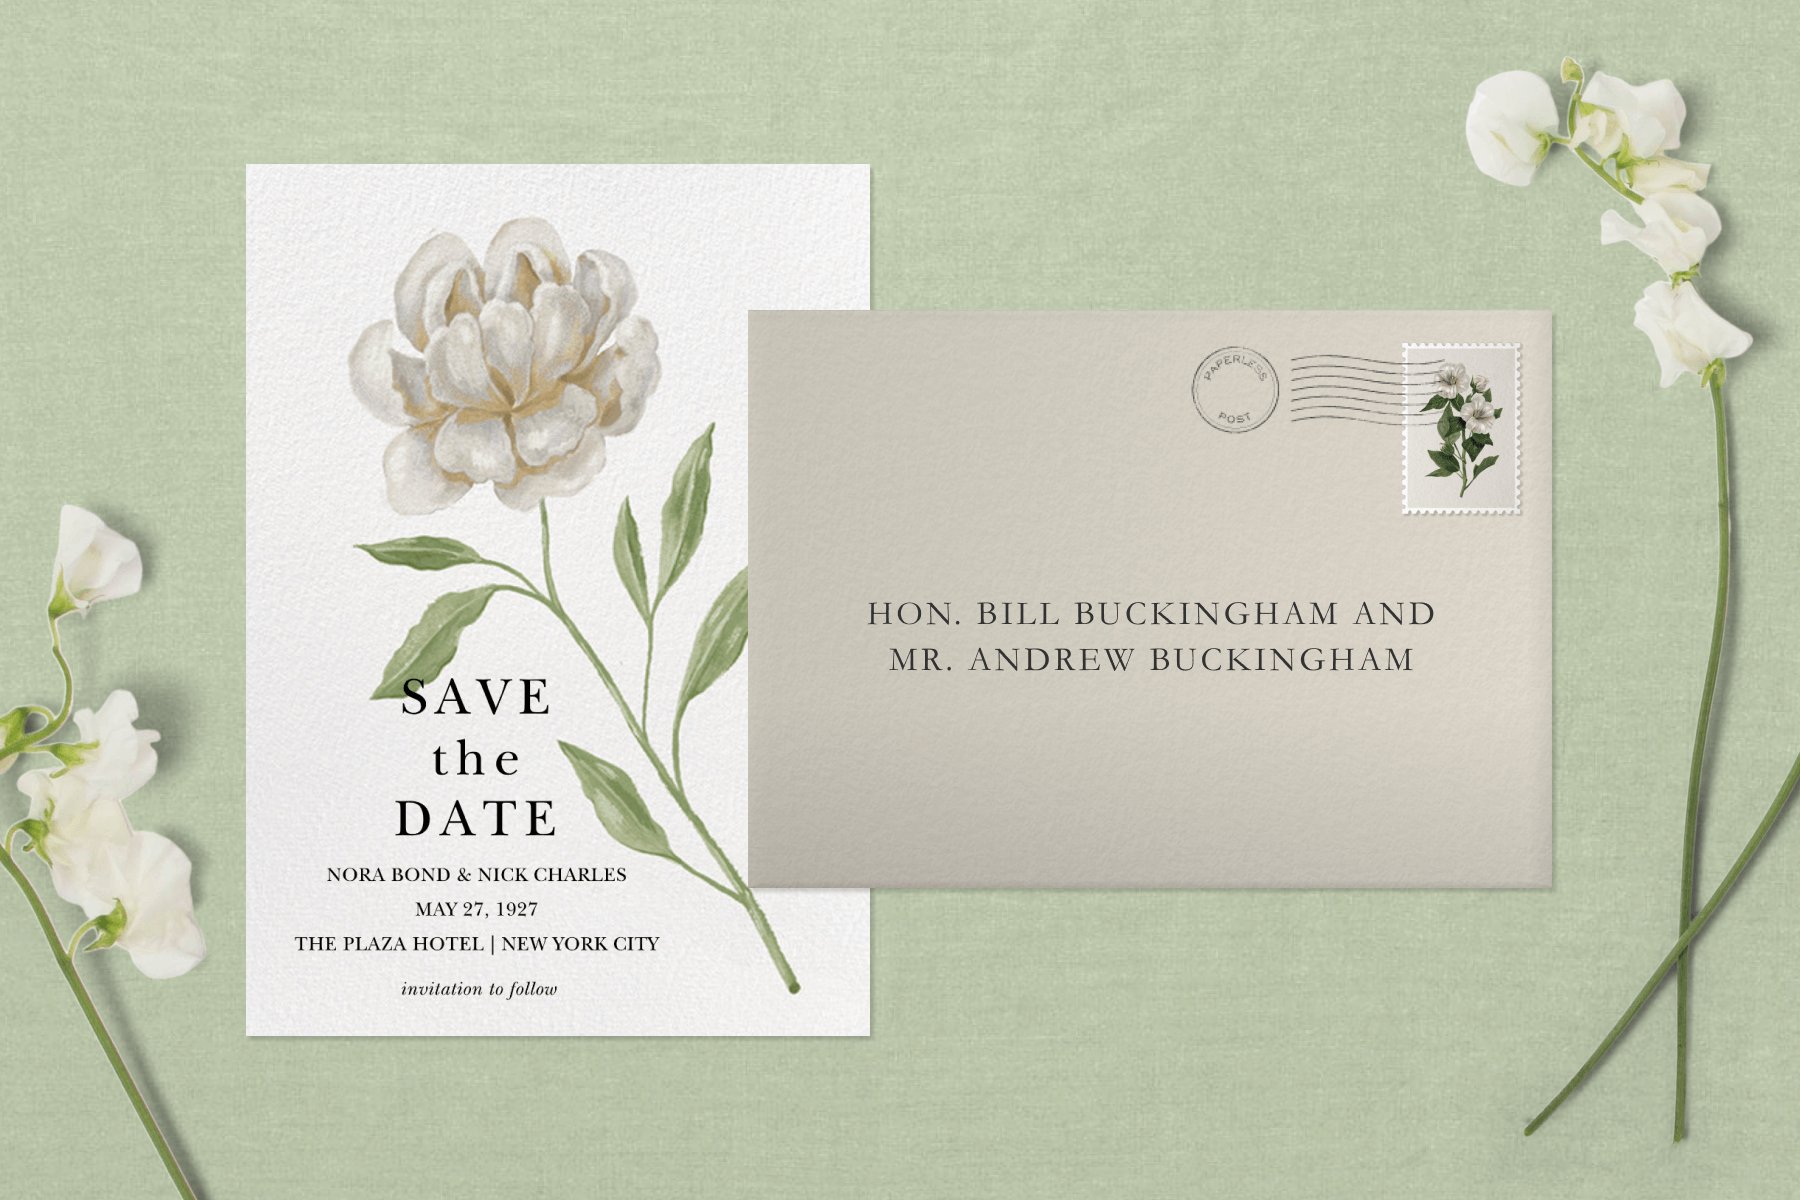 A vertically oriented white save the date card shows a painting of a white flower like a peony beside a gray addressed envelope on a light green background flanked by small white flowers. 